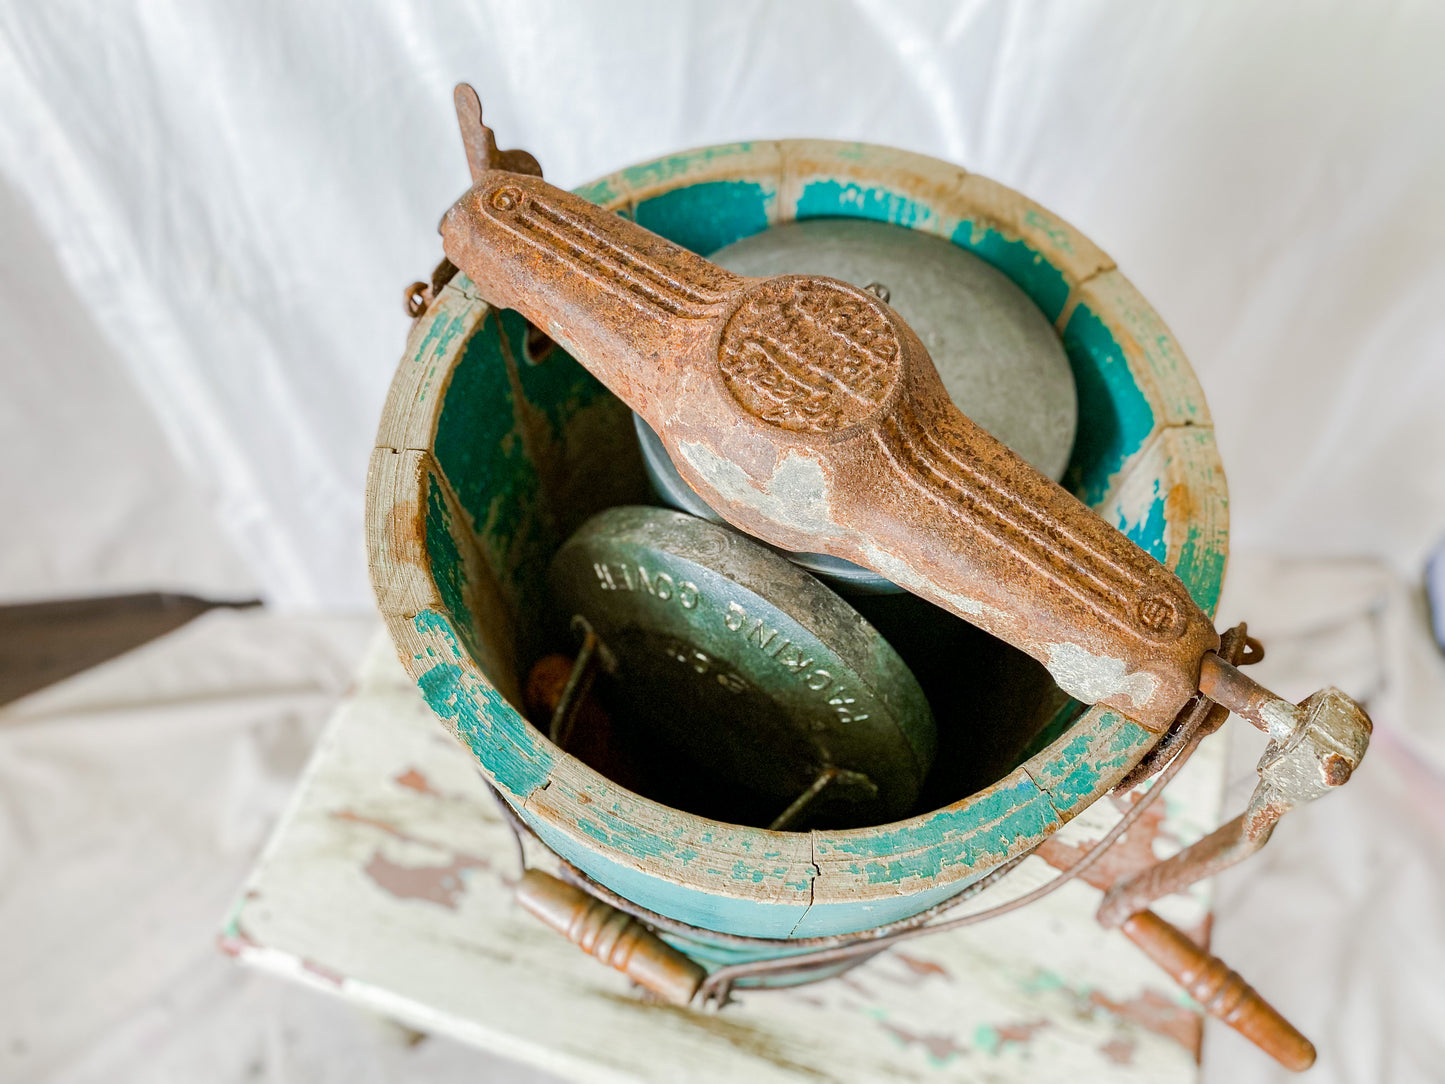 Antique Teal Green Chippy Wood Ice Cream Bucket with Churn Bucket and Crank Handle | Rustic Farmhouse